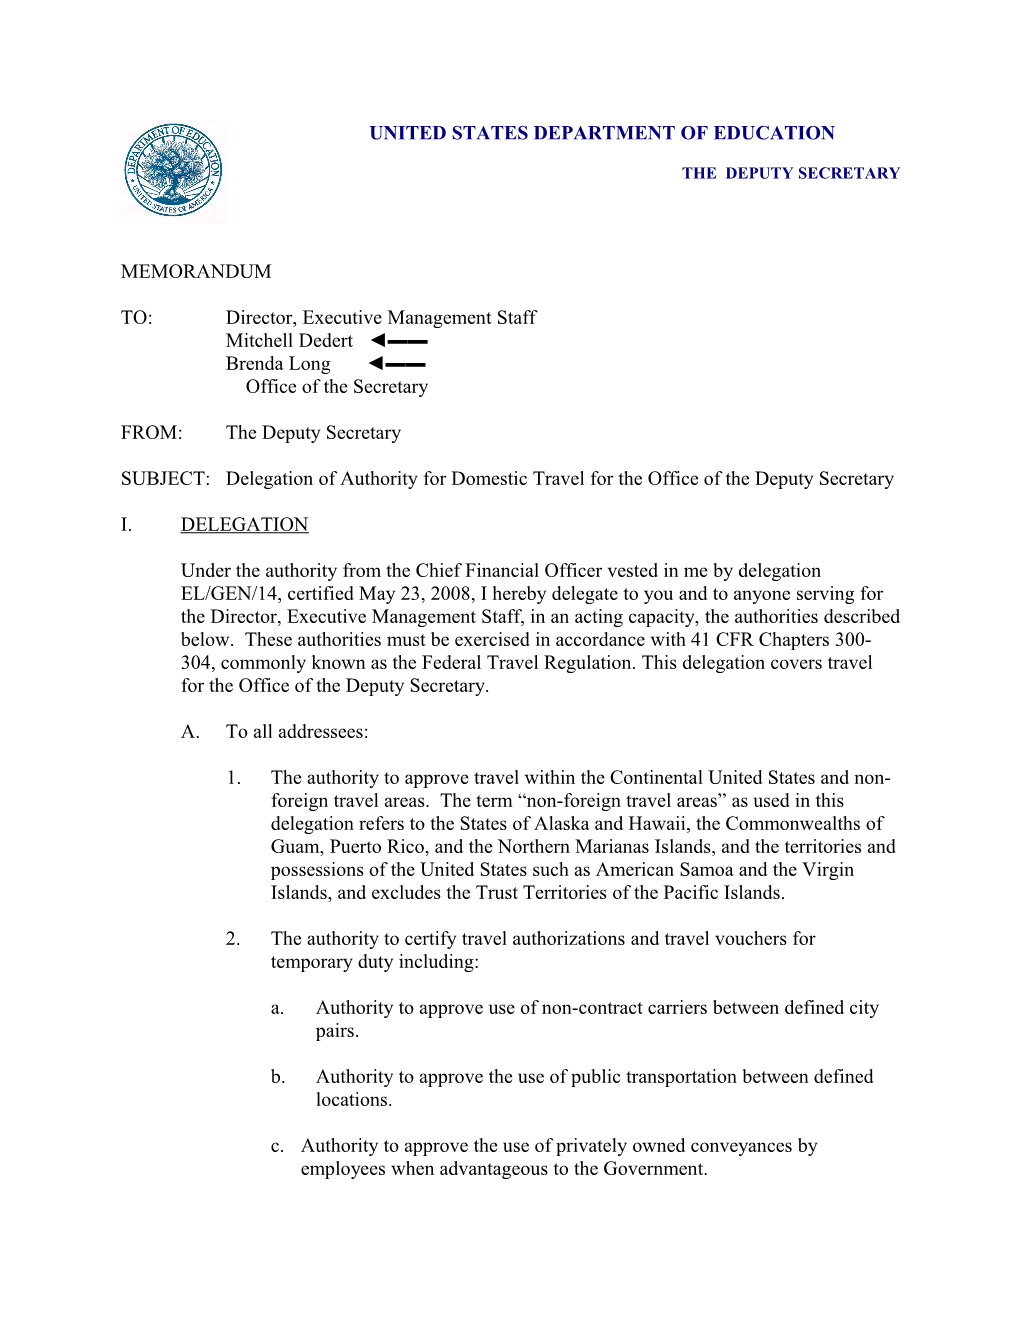 Person Delegation to Mitch Dedert and Brenda Long, of the Authority to Approve Travel Within